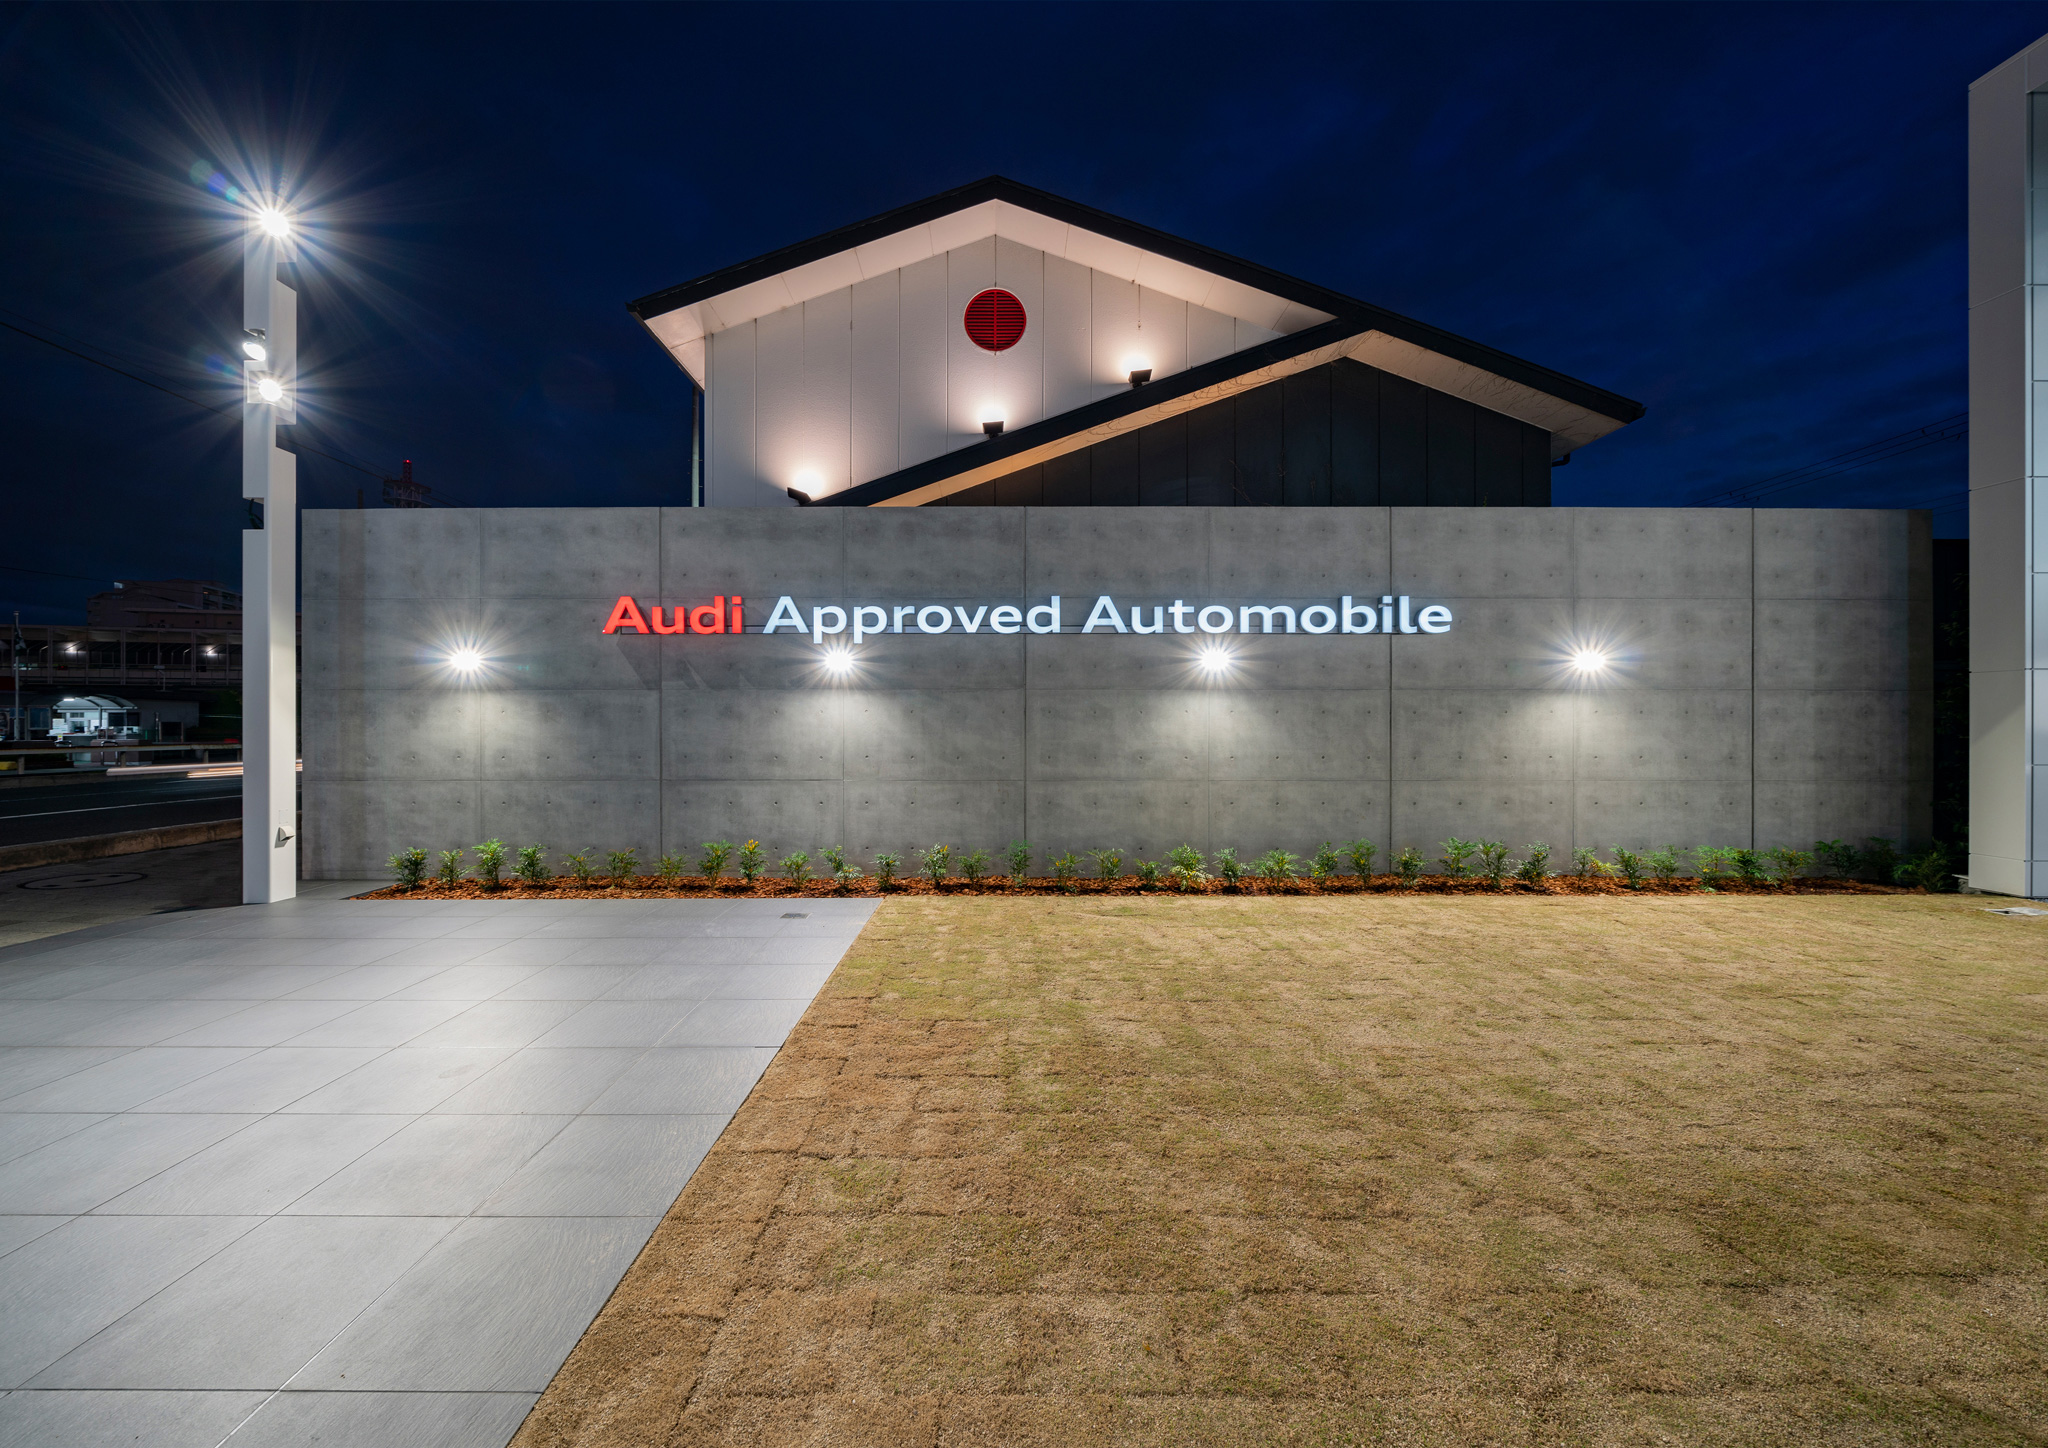 Audi Approved Automobile 西宮 09/30